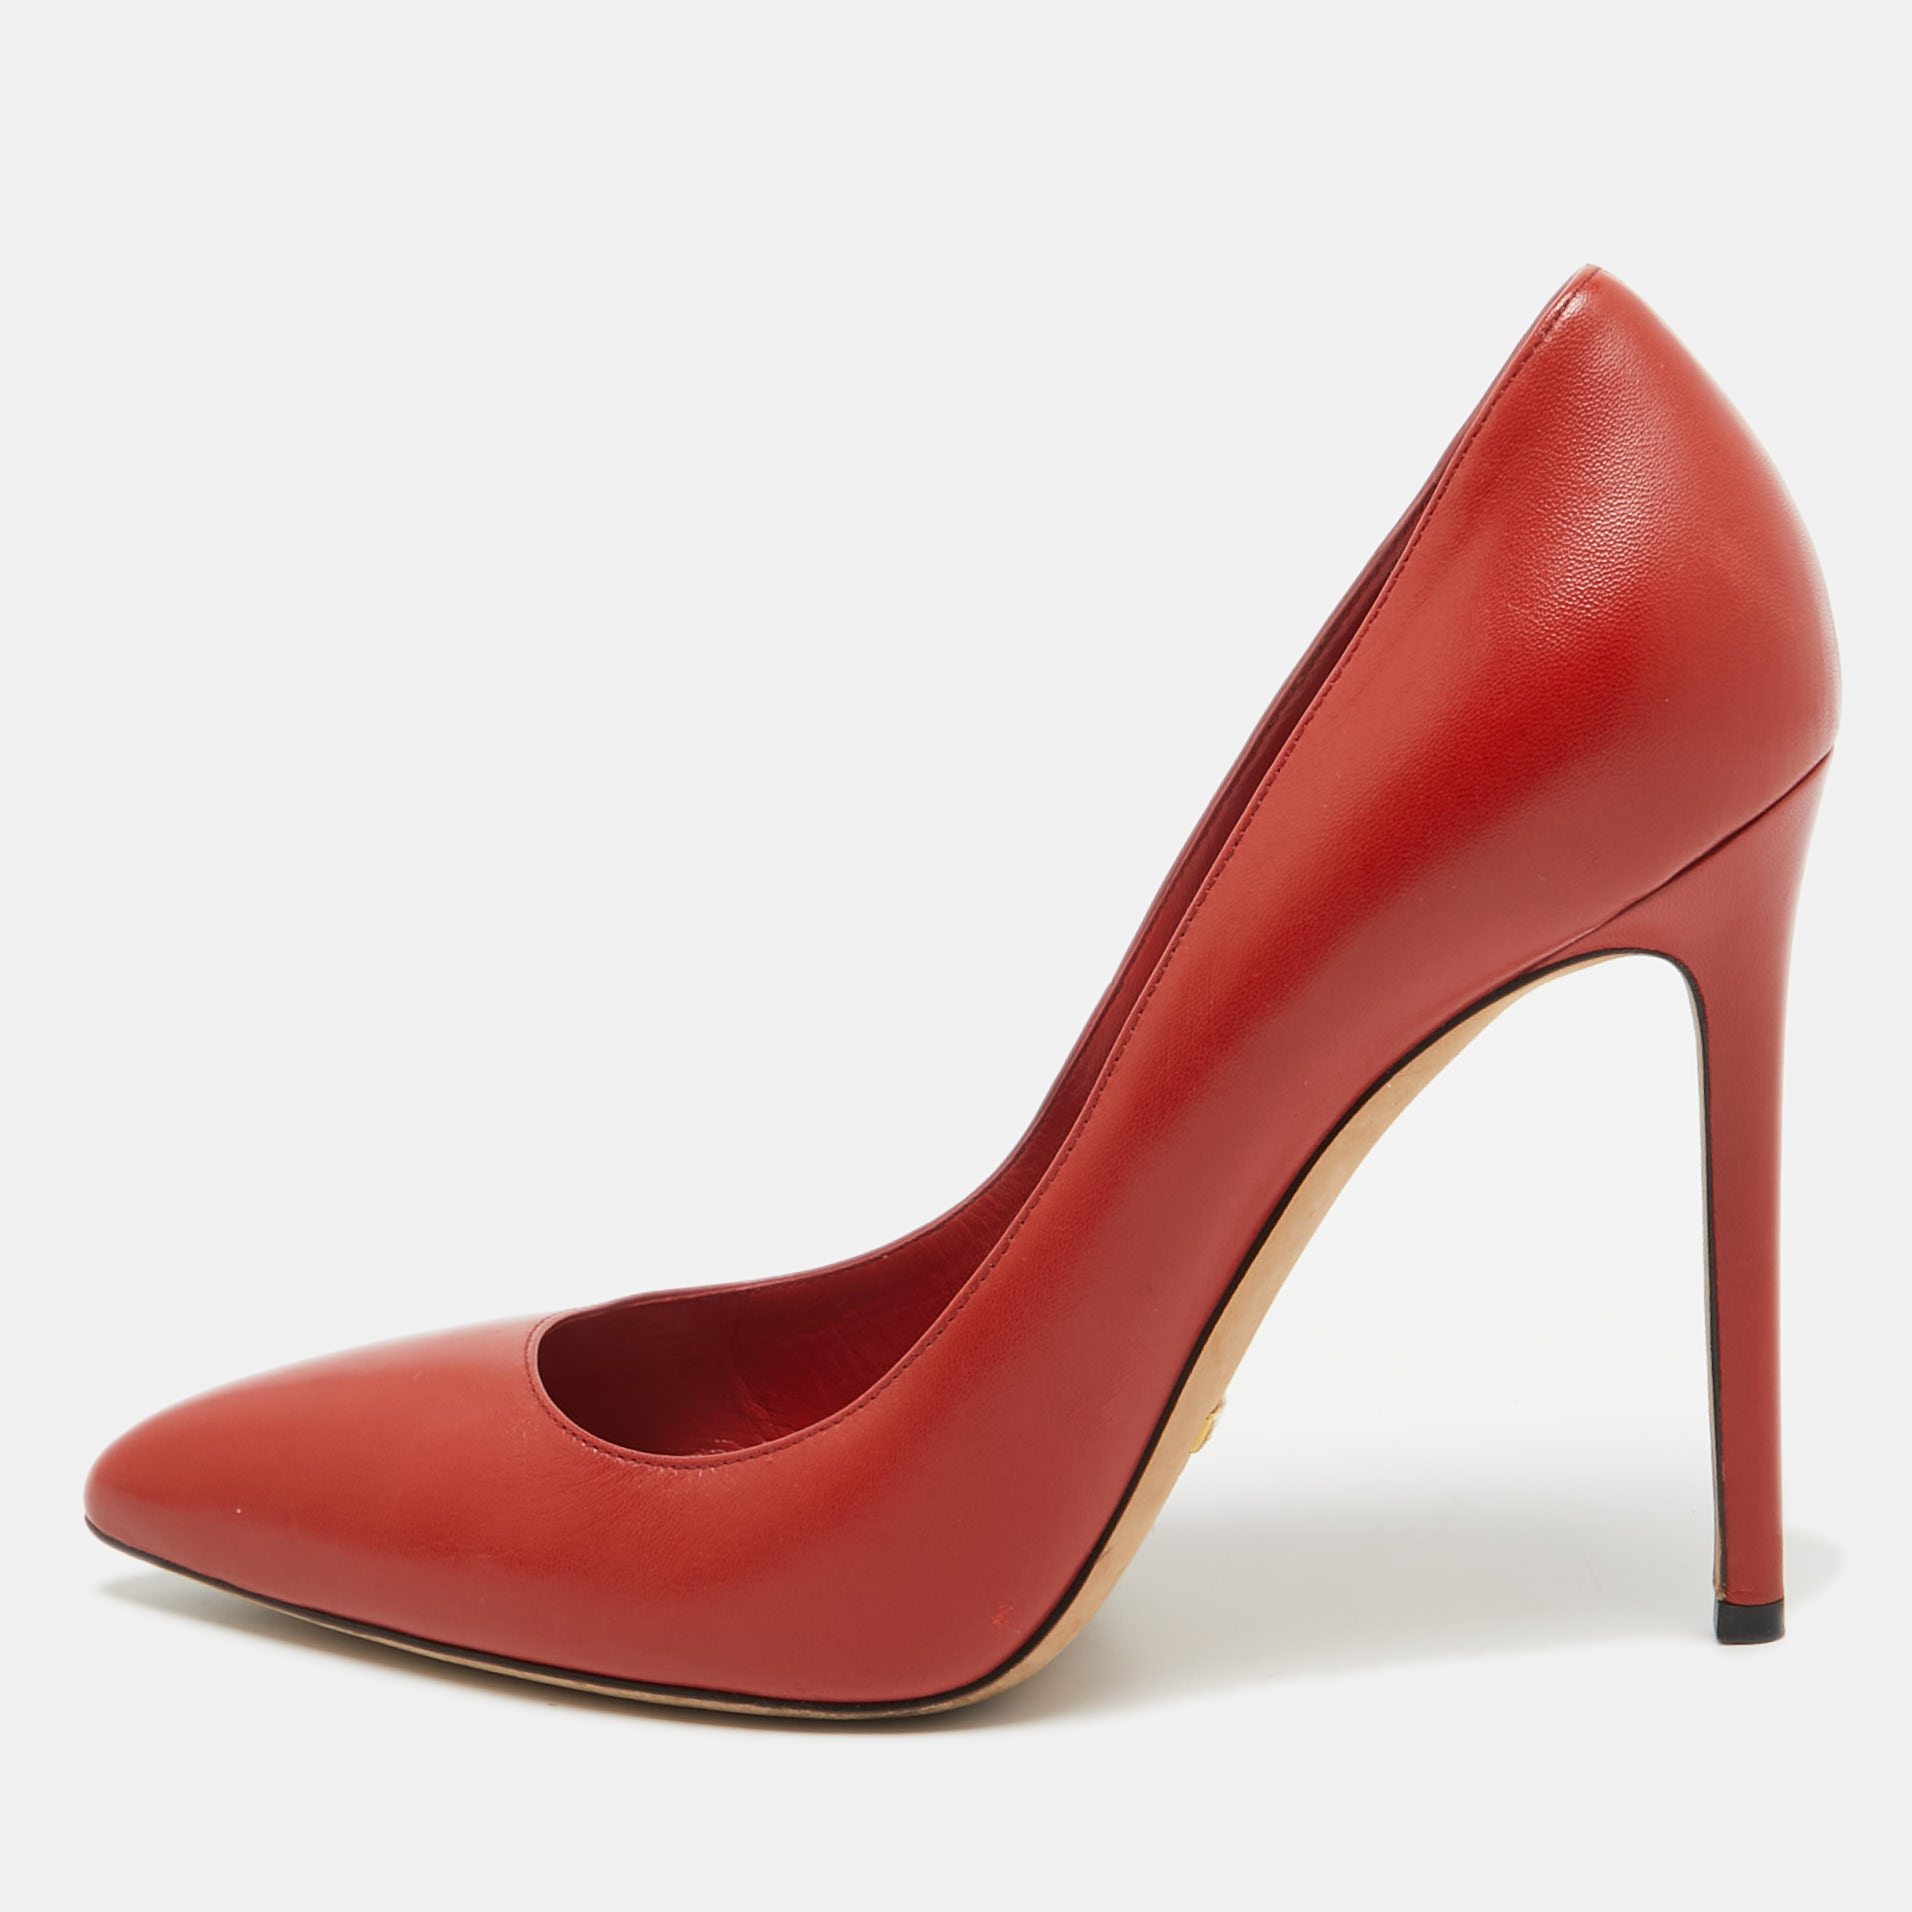 Gucci red leather pointed toe pumps size 38.5